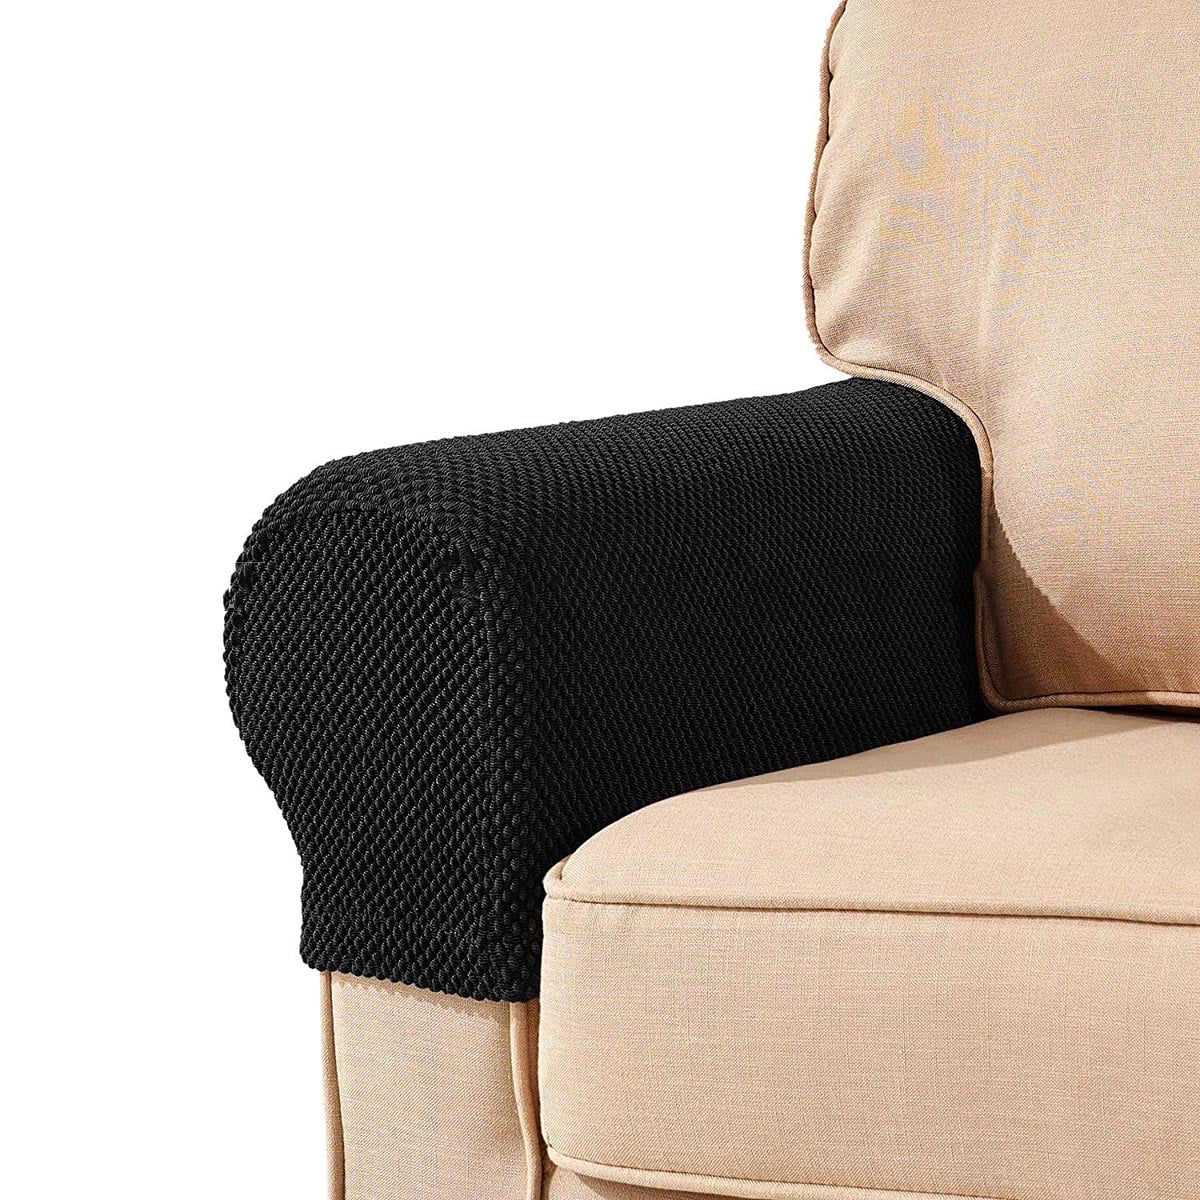 2pcs Sofa Armrest Cover Couch Arm Covers Spandex Stretch Jacquard Armchair Arm Rest Covers Set Non Slip Grey, Fabric